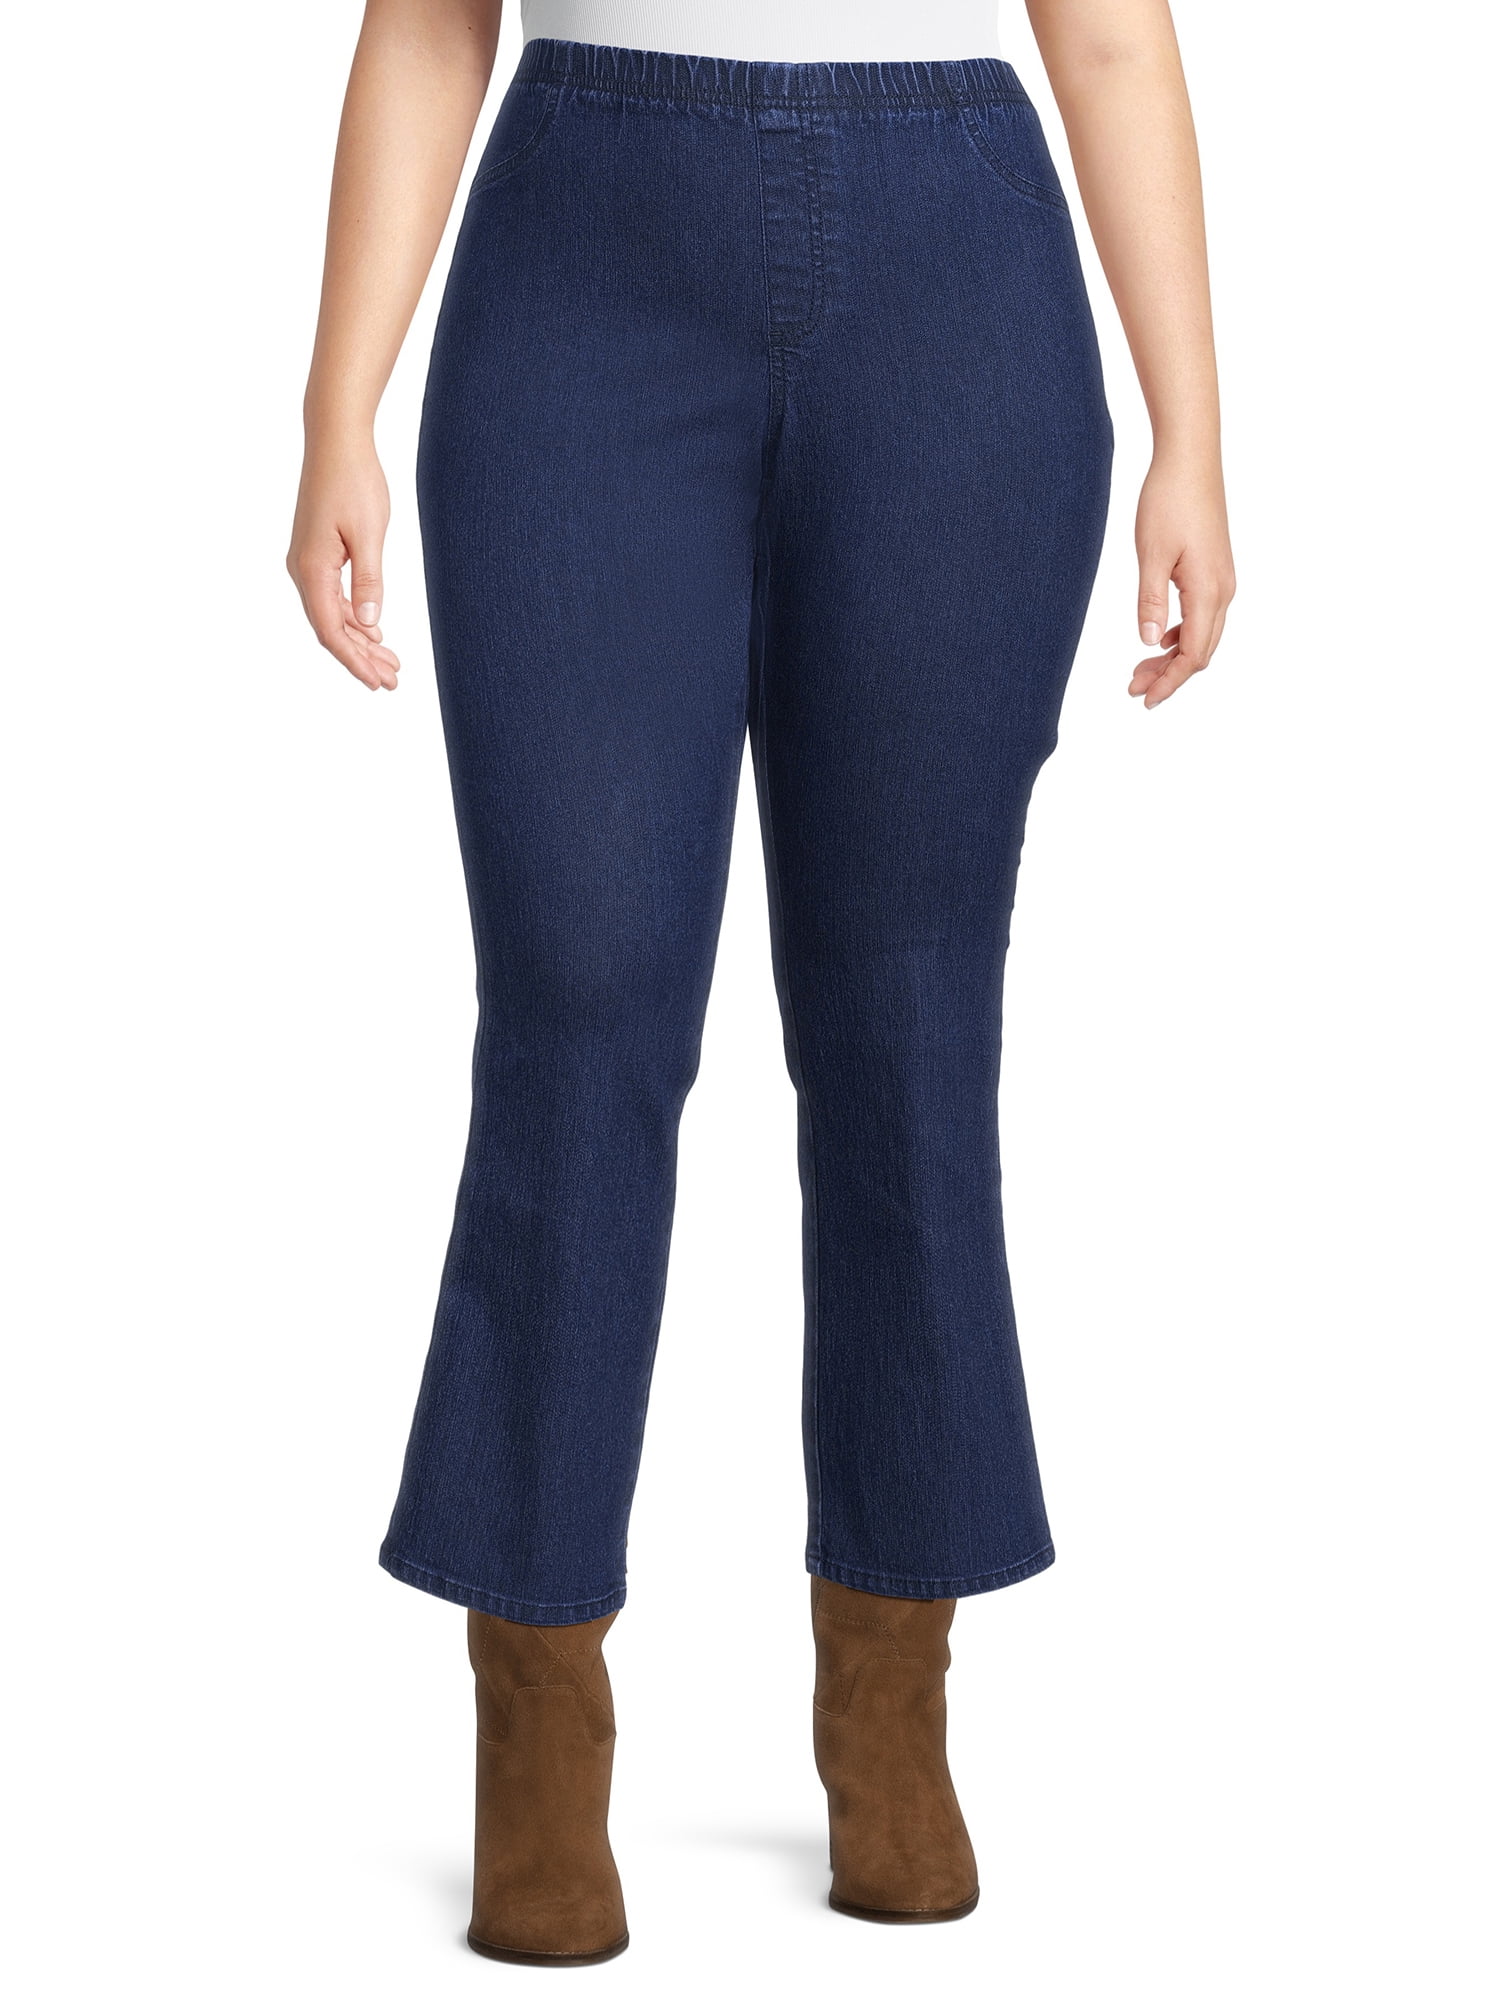 Just My Size Women's Plus Size Pull-On Stretch Jeggings 